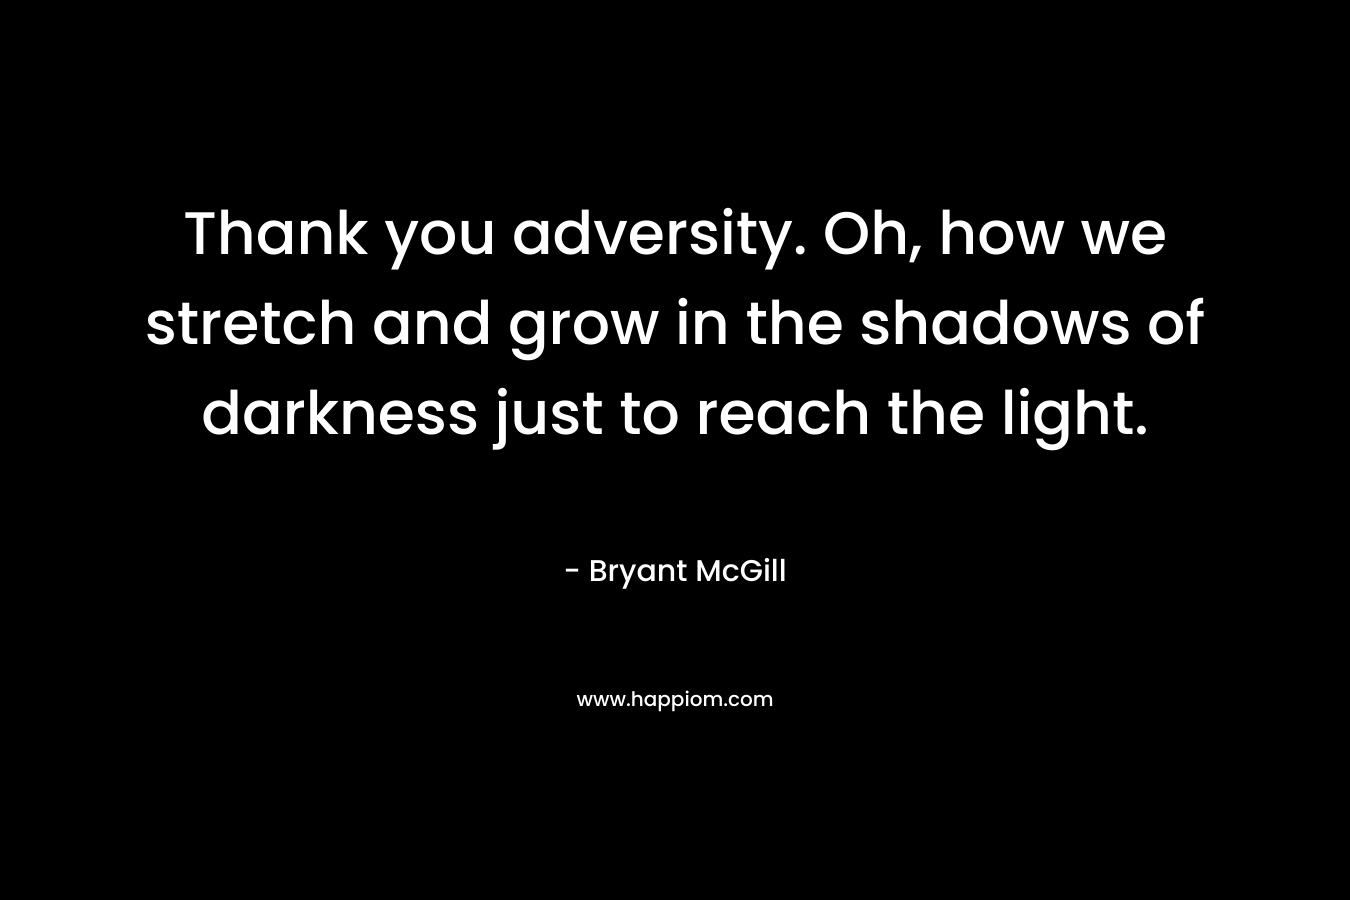 Thank you adversity. Oh, how we stretch and grow in the shadows of darkness just to reach the light.